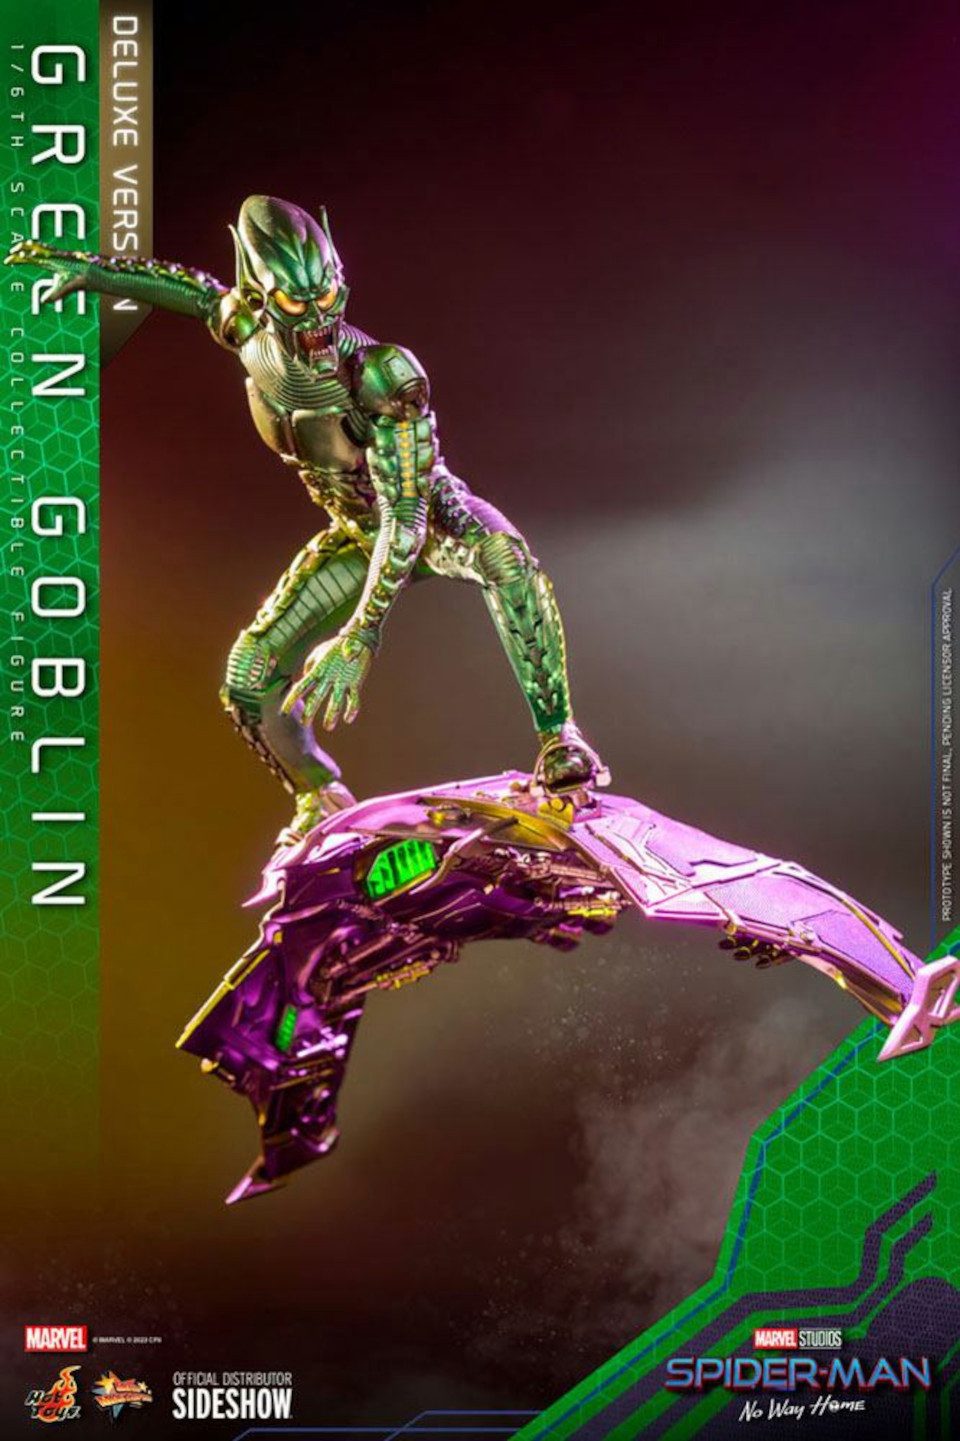 Hot Toys Actionfigur Hot Toys Spider-Man: No Way Home MMP Green Goblin Actionfigur DLX